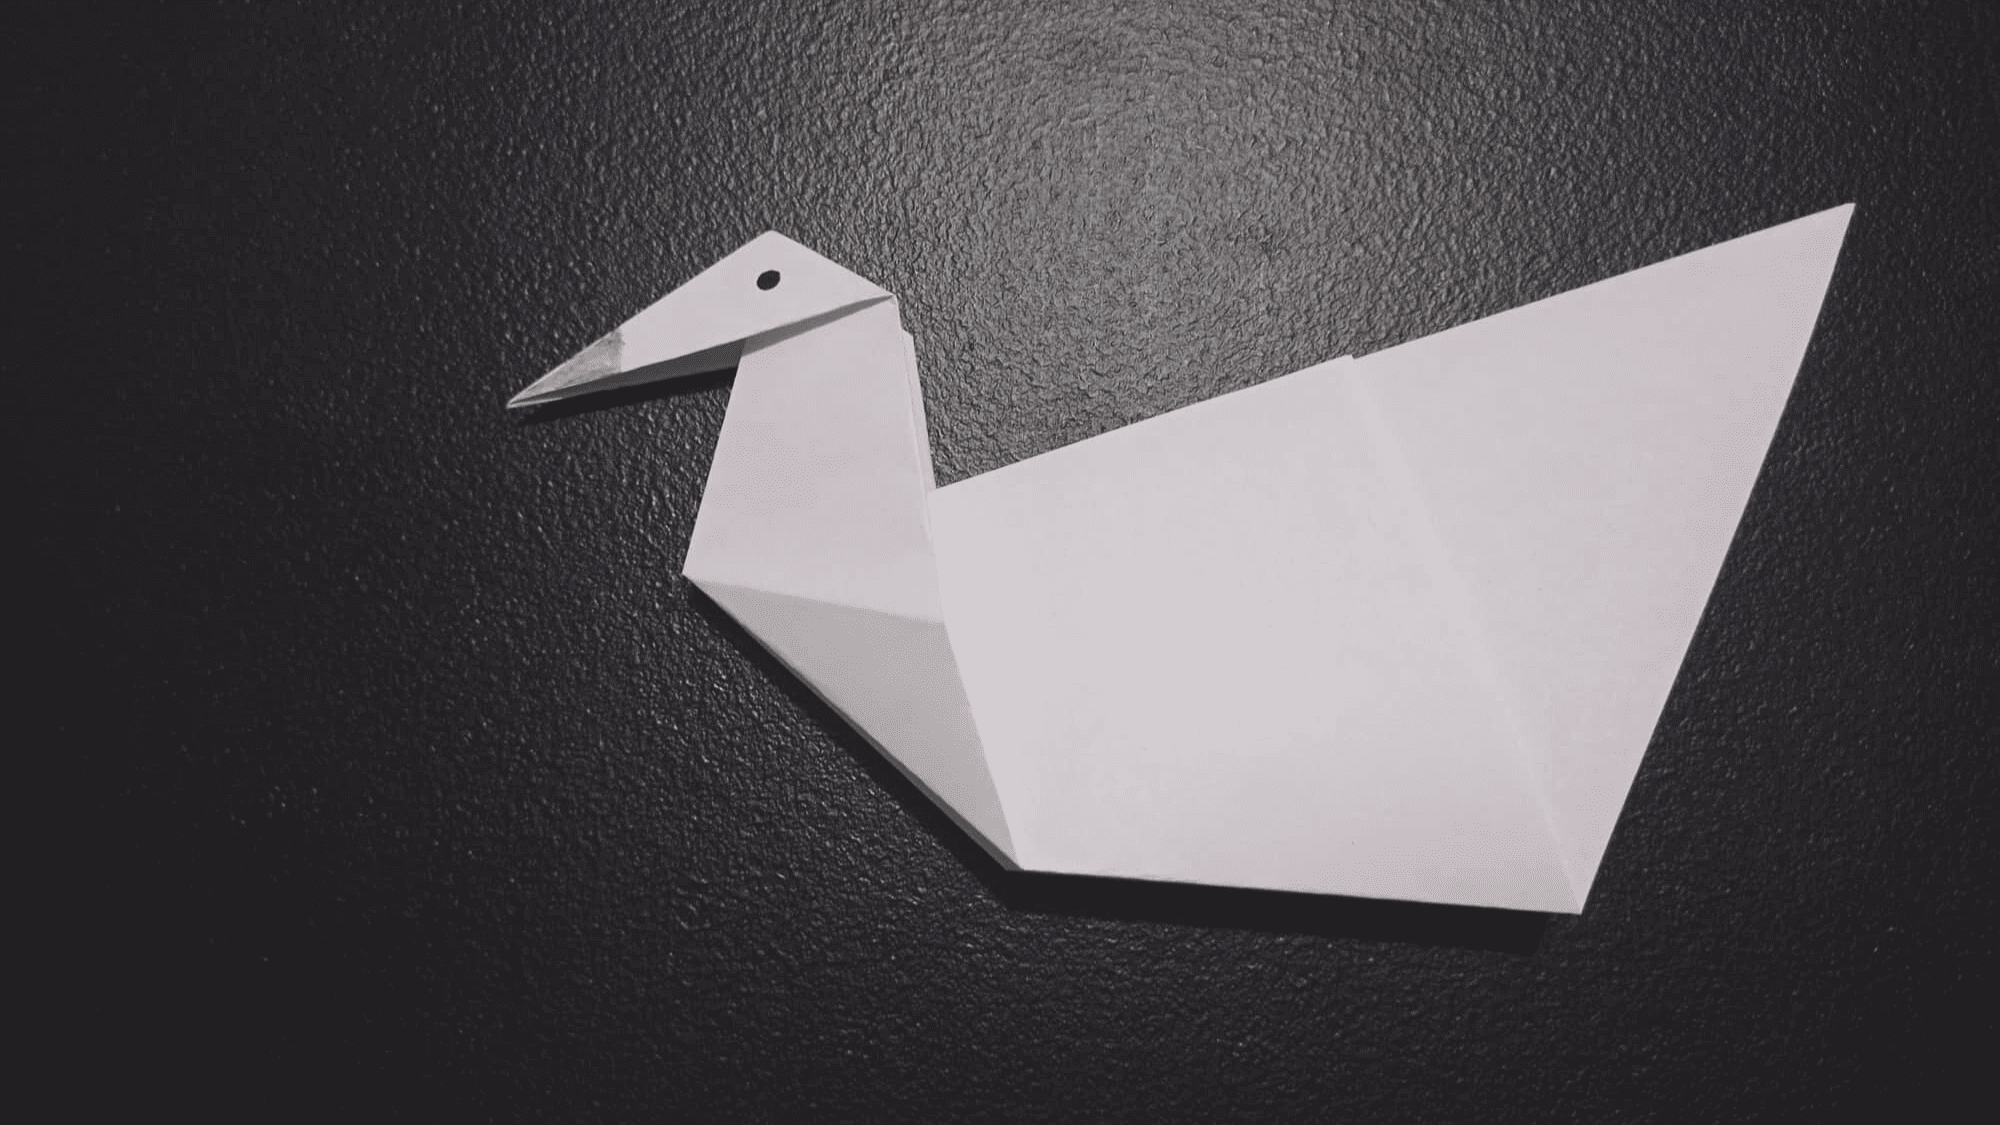 How to Make an Easy Origami Duck Origami Duck Easy Instructions